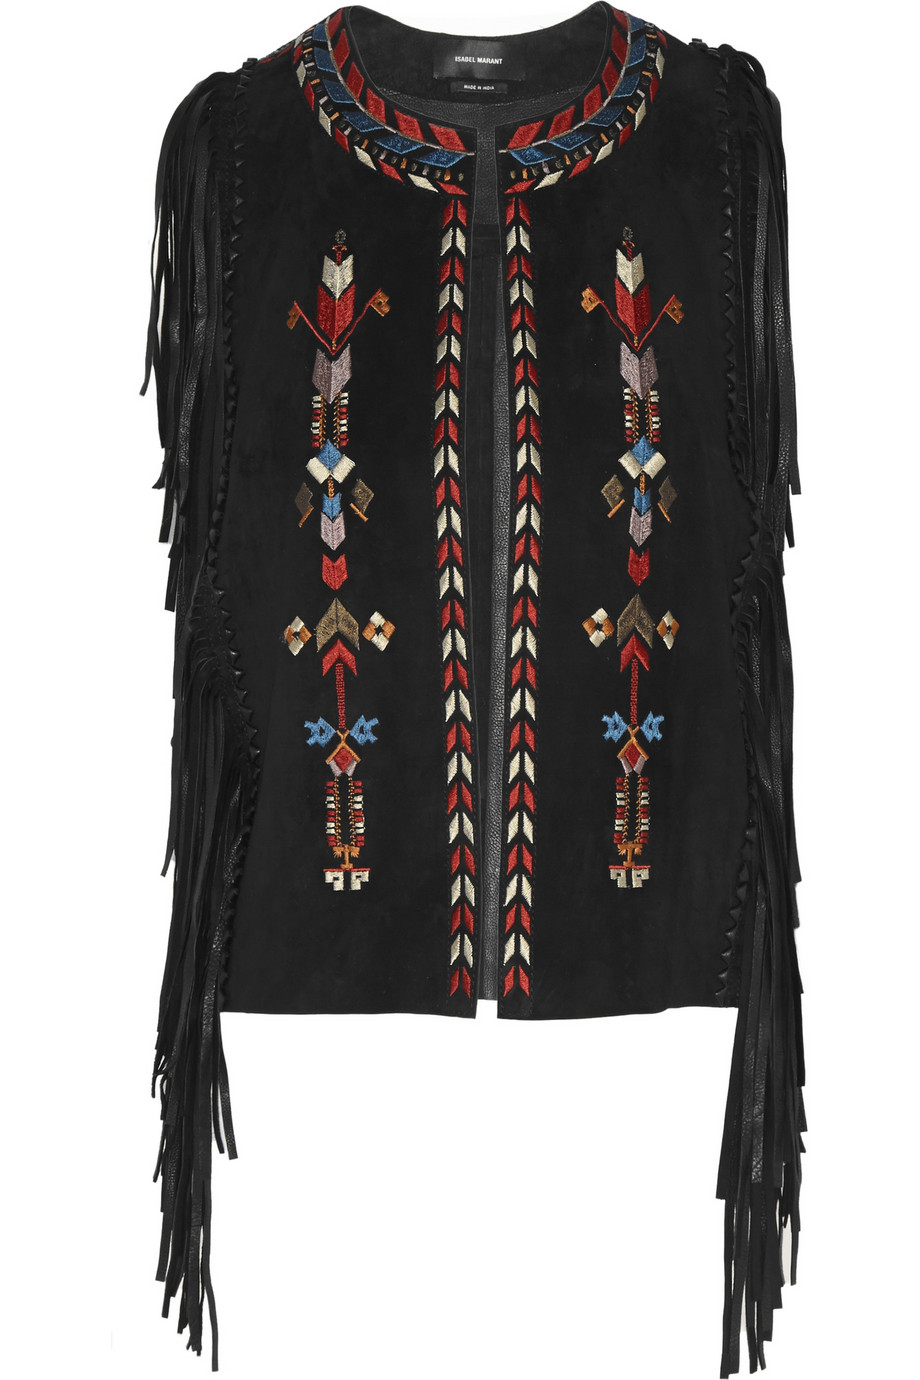 httpswww.theoutnet.comen-NLproductIsabel-MarantMaxime-fringed-embroidered-suede-vest514029